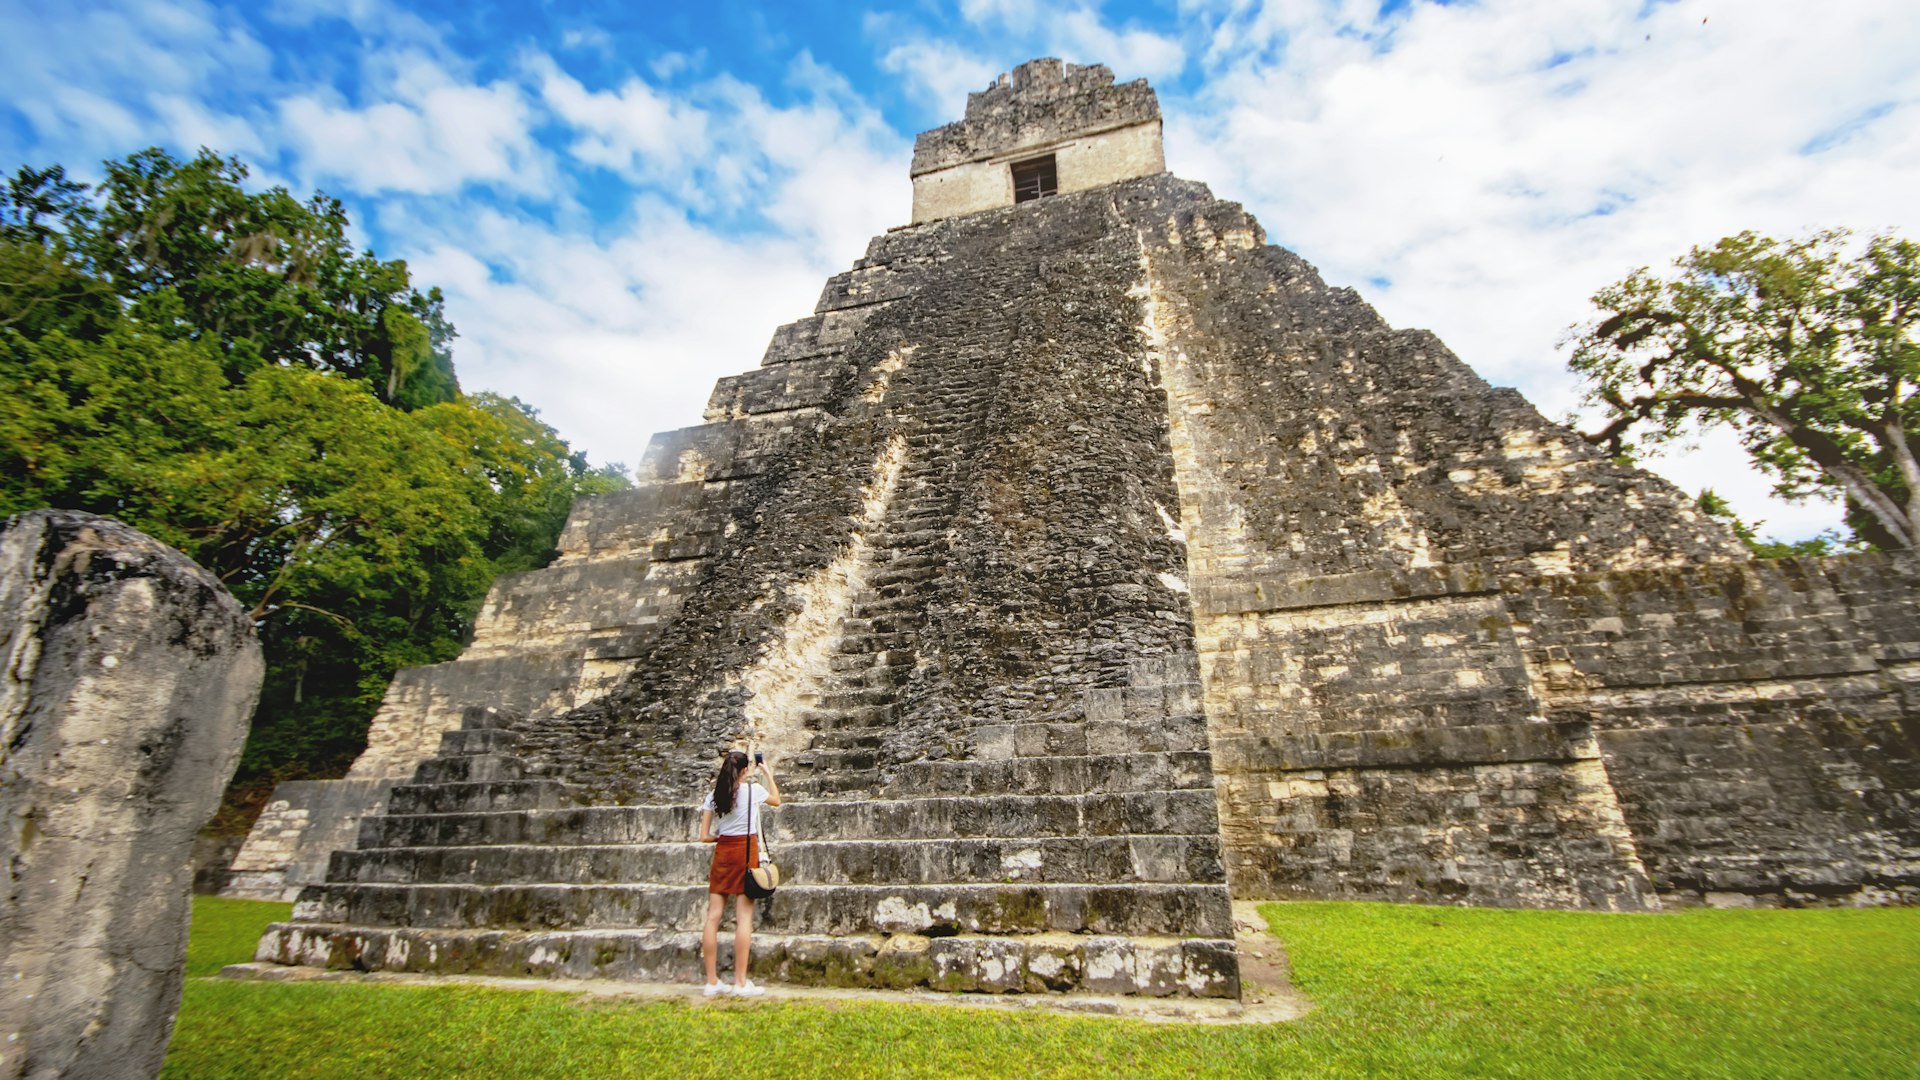 Teenager using Mobile Phone to Take Pictures of Tikal in Guatemala